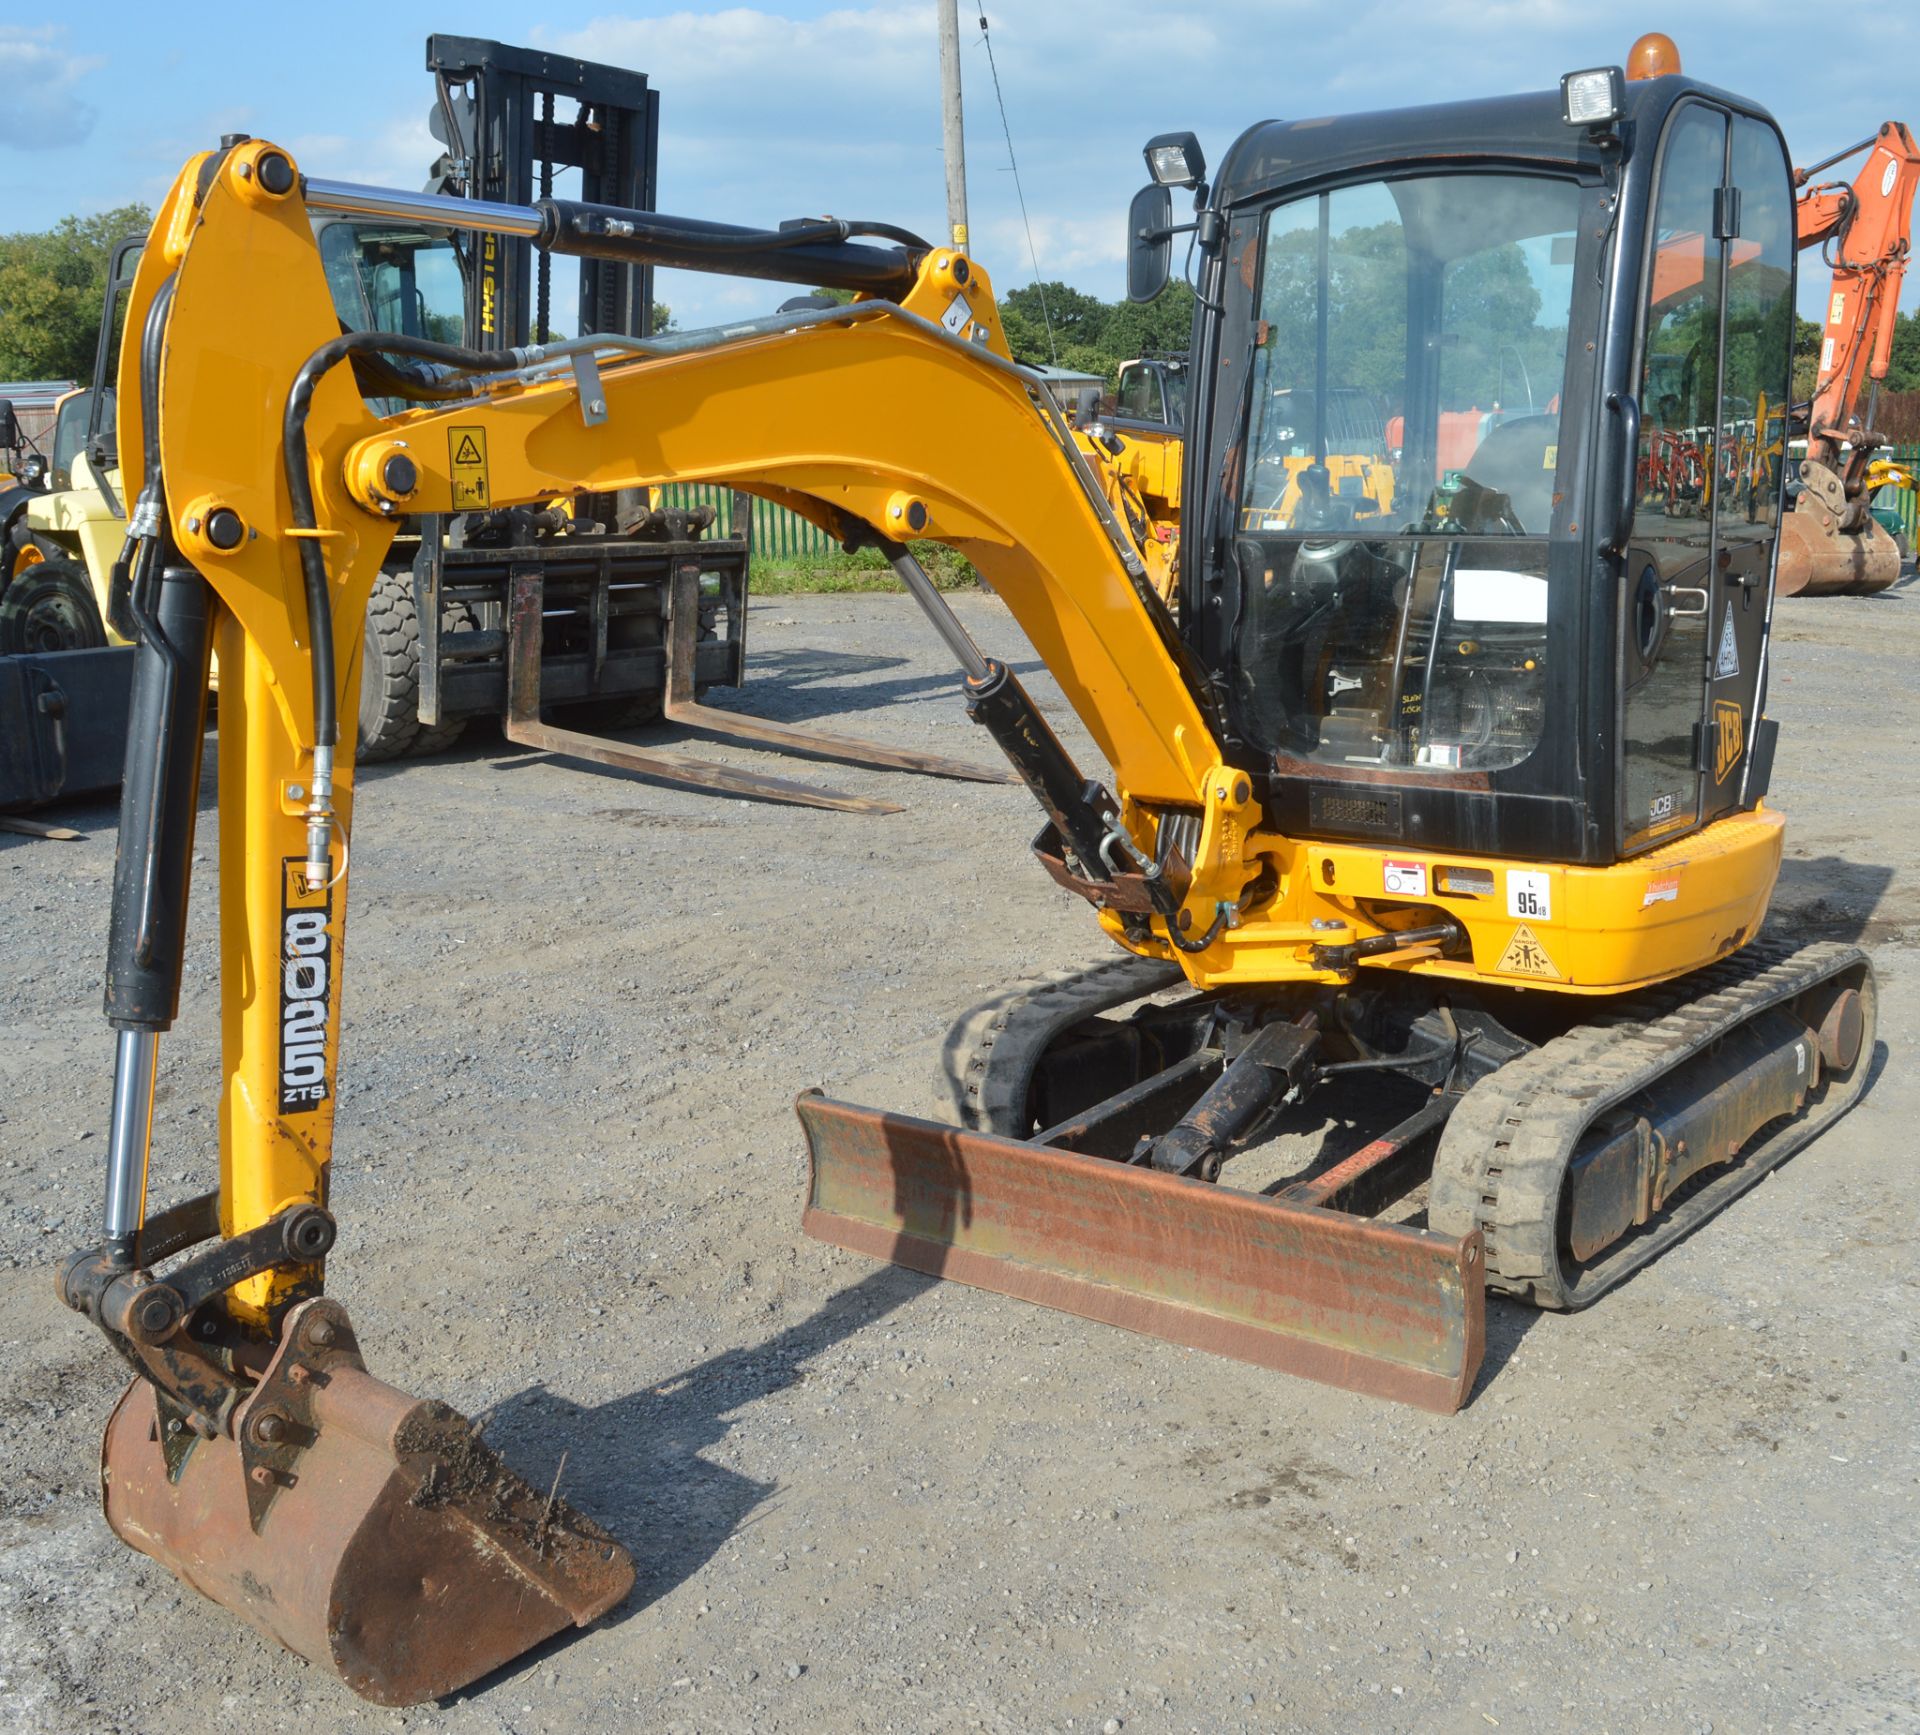 JCB 8025 2.5 tonne rubber tracked mini excavator  Year: 2013 S/N: 2226205 Recorded hours: 876